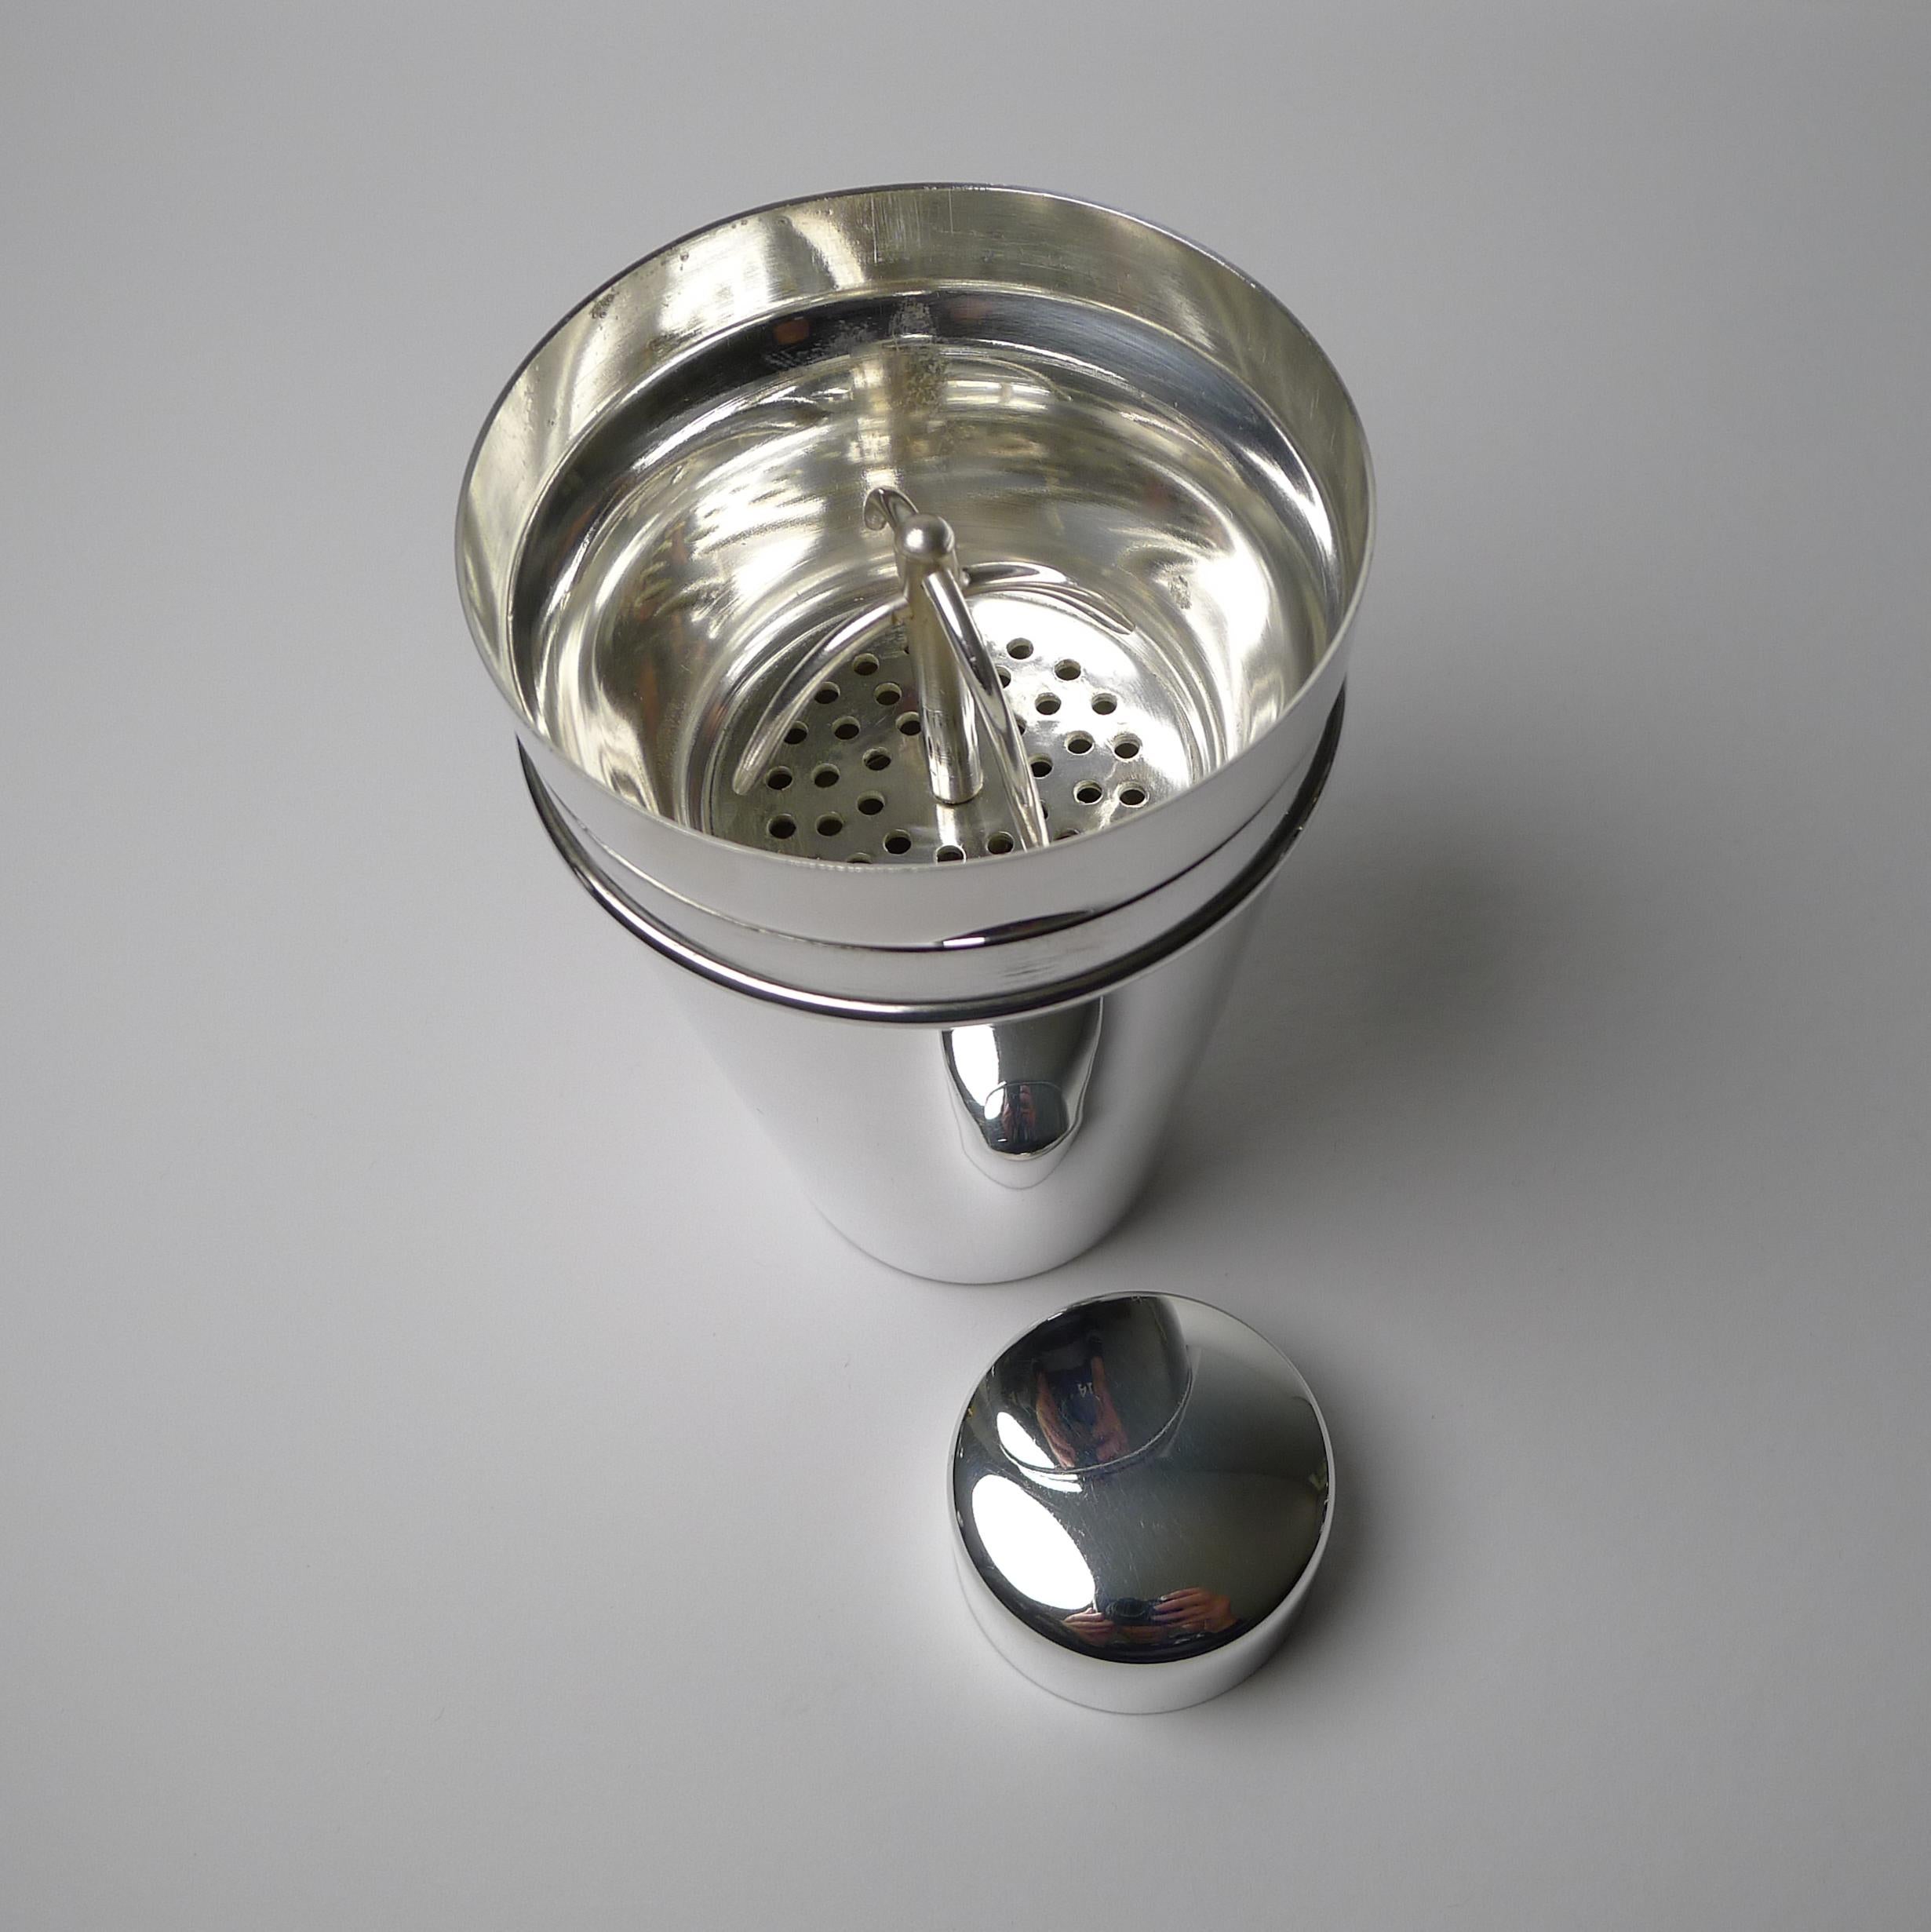 English Art Deco Cocktail Shaker by William Suckling Ltd, C.1930 For Sale 2